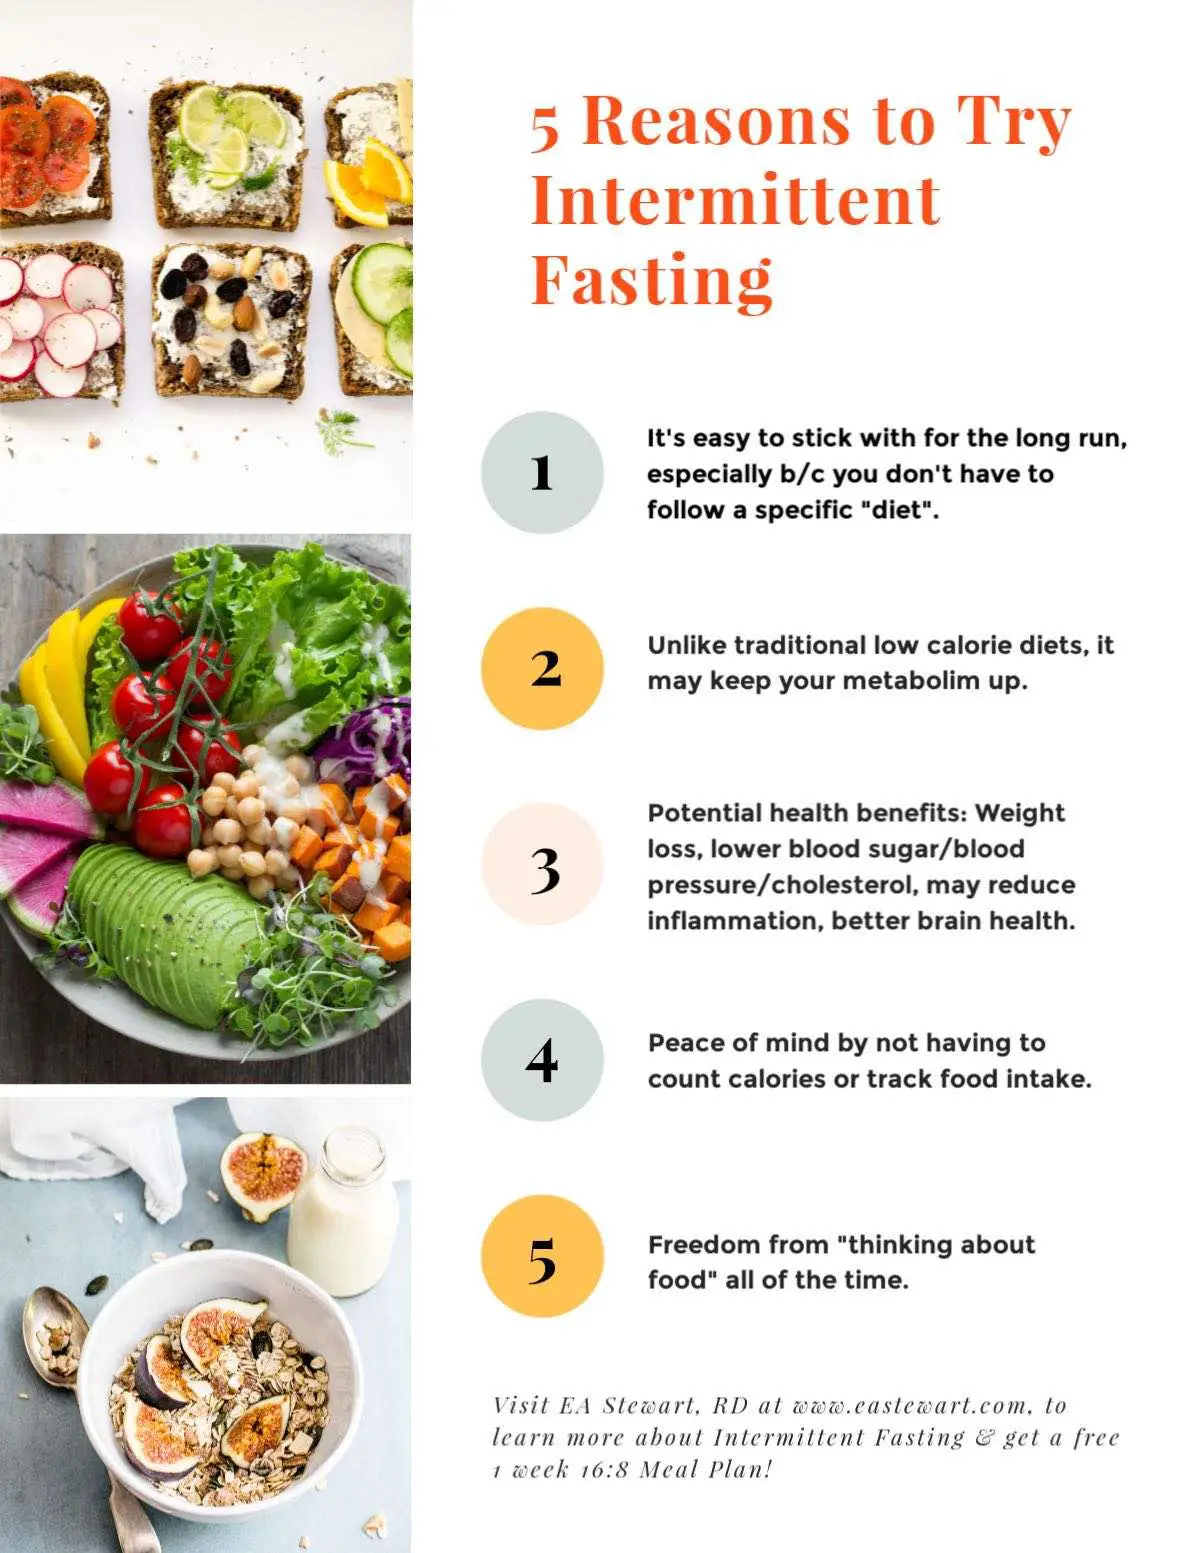 Intermittent Fasting 101 + A Free 16: 8 Meal Plan